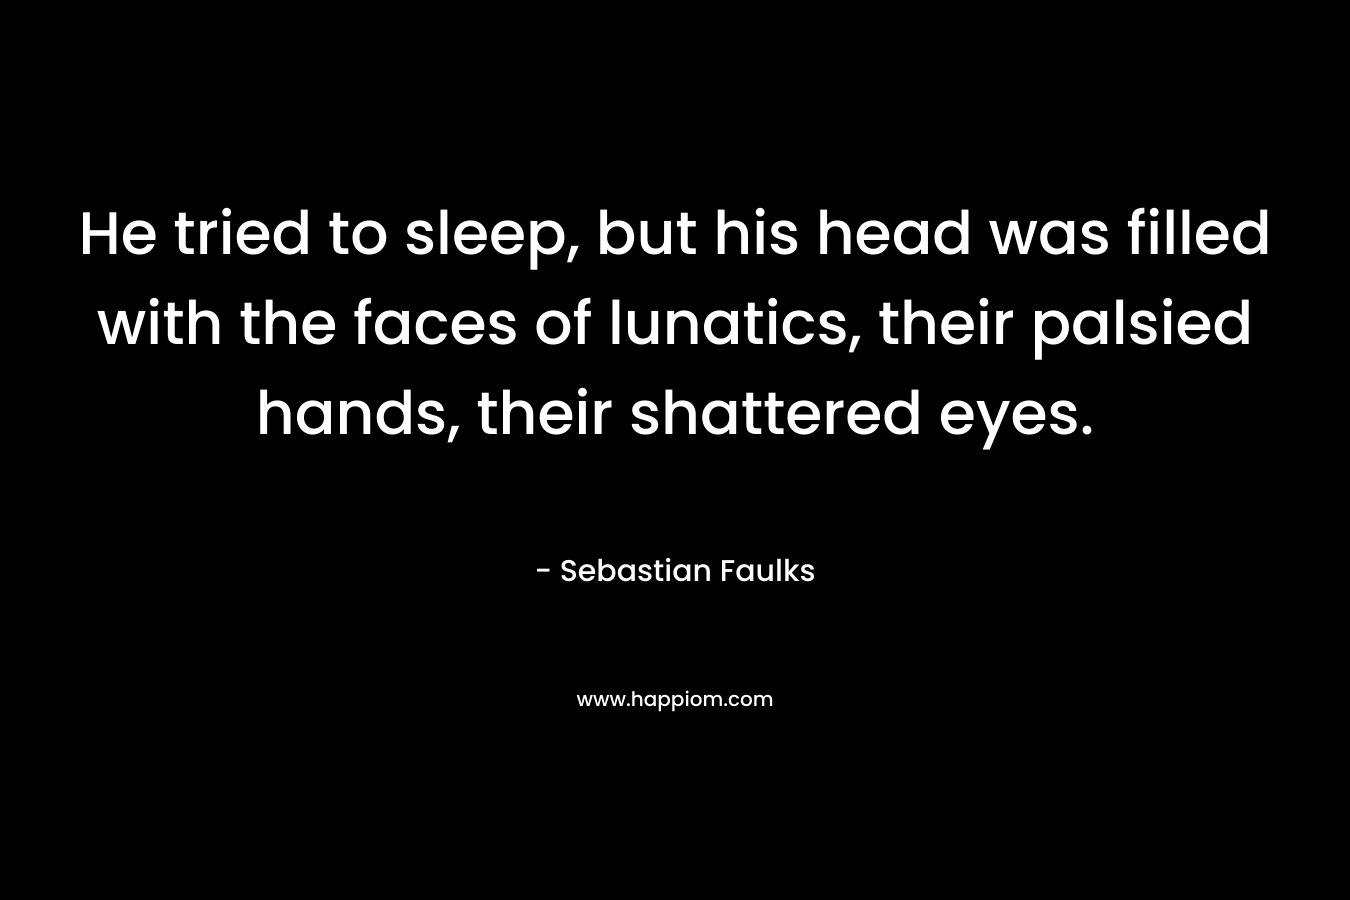 He tried to sleep, but his head was filled with the faces of lunatics, their palsied hands, their shattered eyes. – Sebastian Faulks